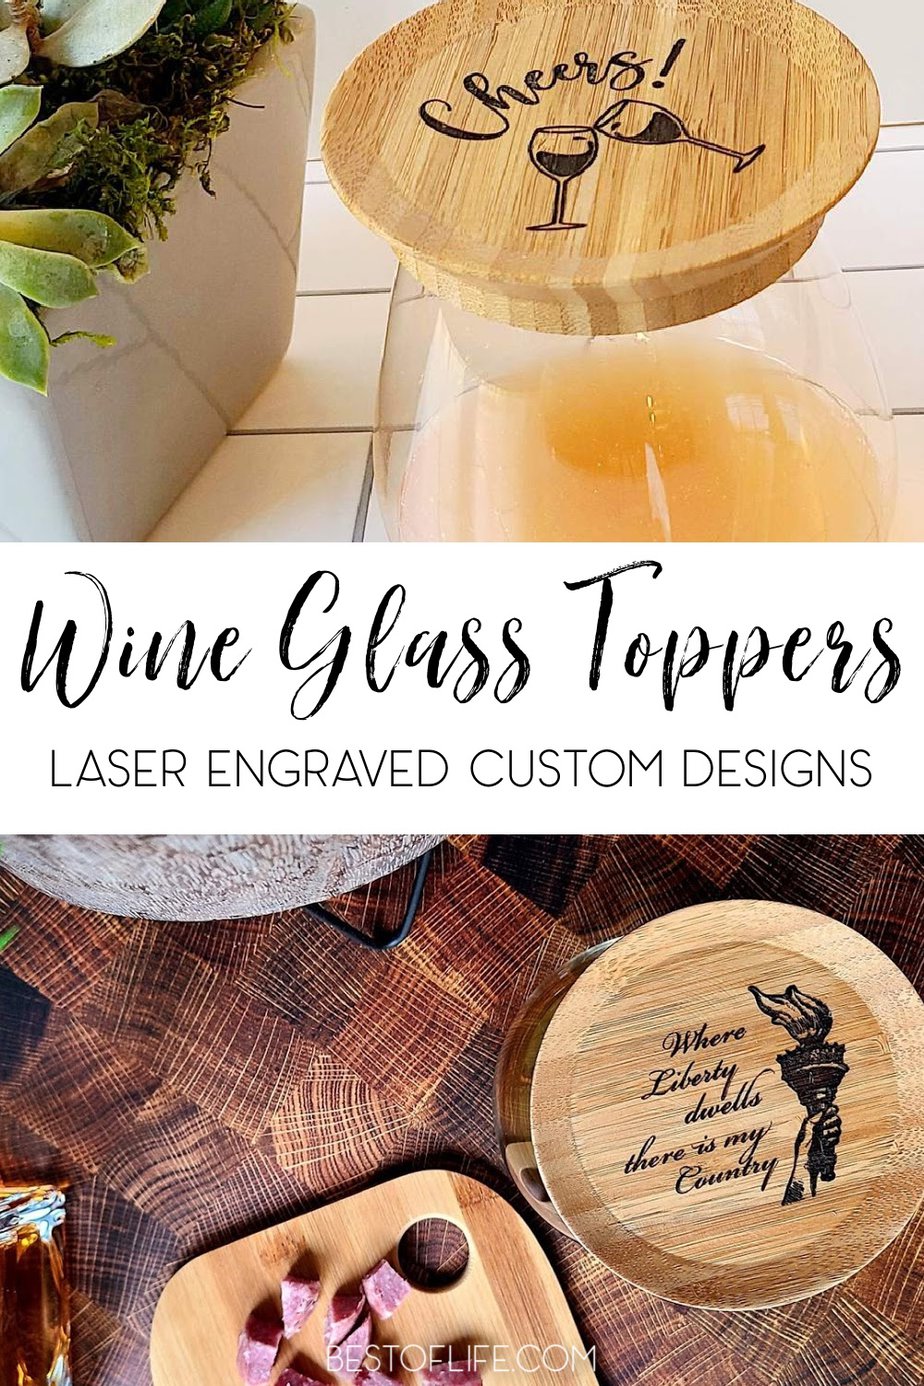 The best wine glass toppers help you mingle and are the perfect small appetizer plate. They serve as a great drink marker and help you show off your personality, too. Wine Glasses | DIY Wine Glass Toppers | Tips for Drinking Wine | Wine Party Ideas | Party Planning | Party Supplies #winedown #partytips